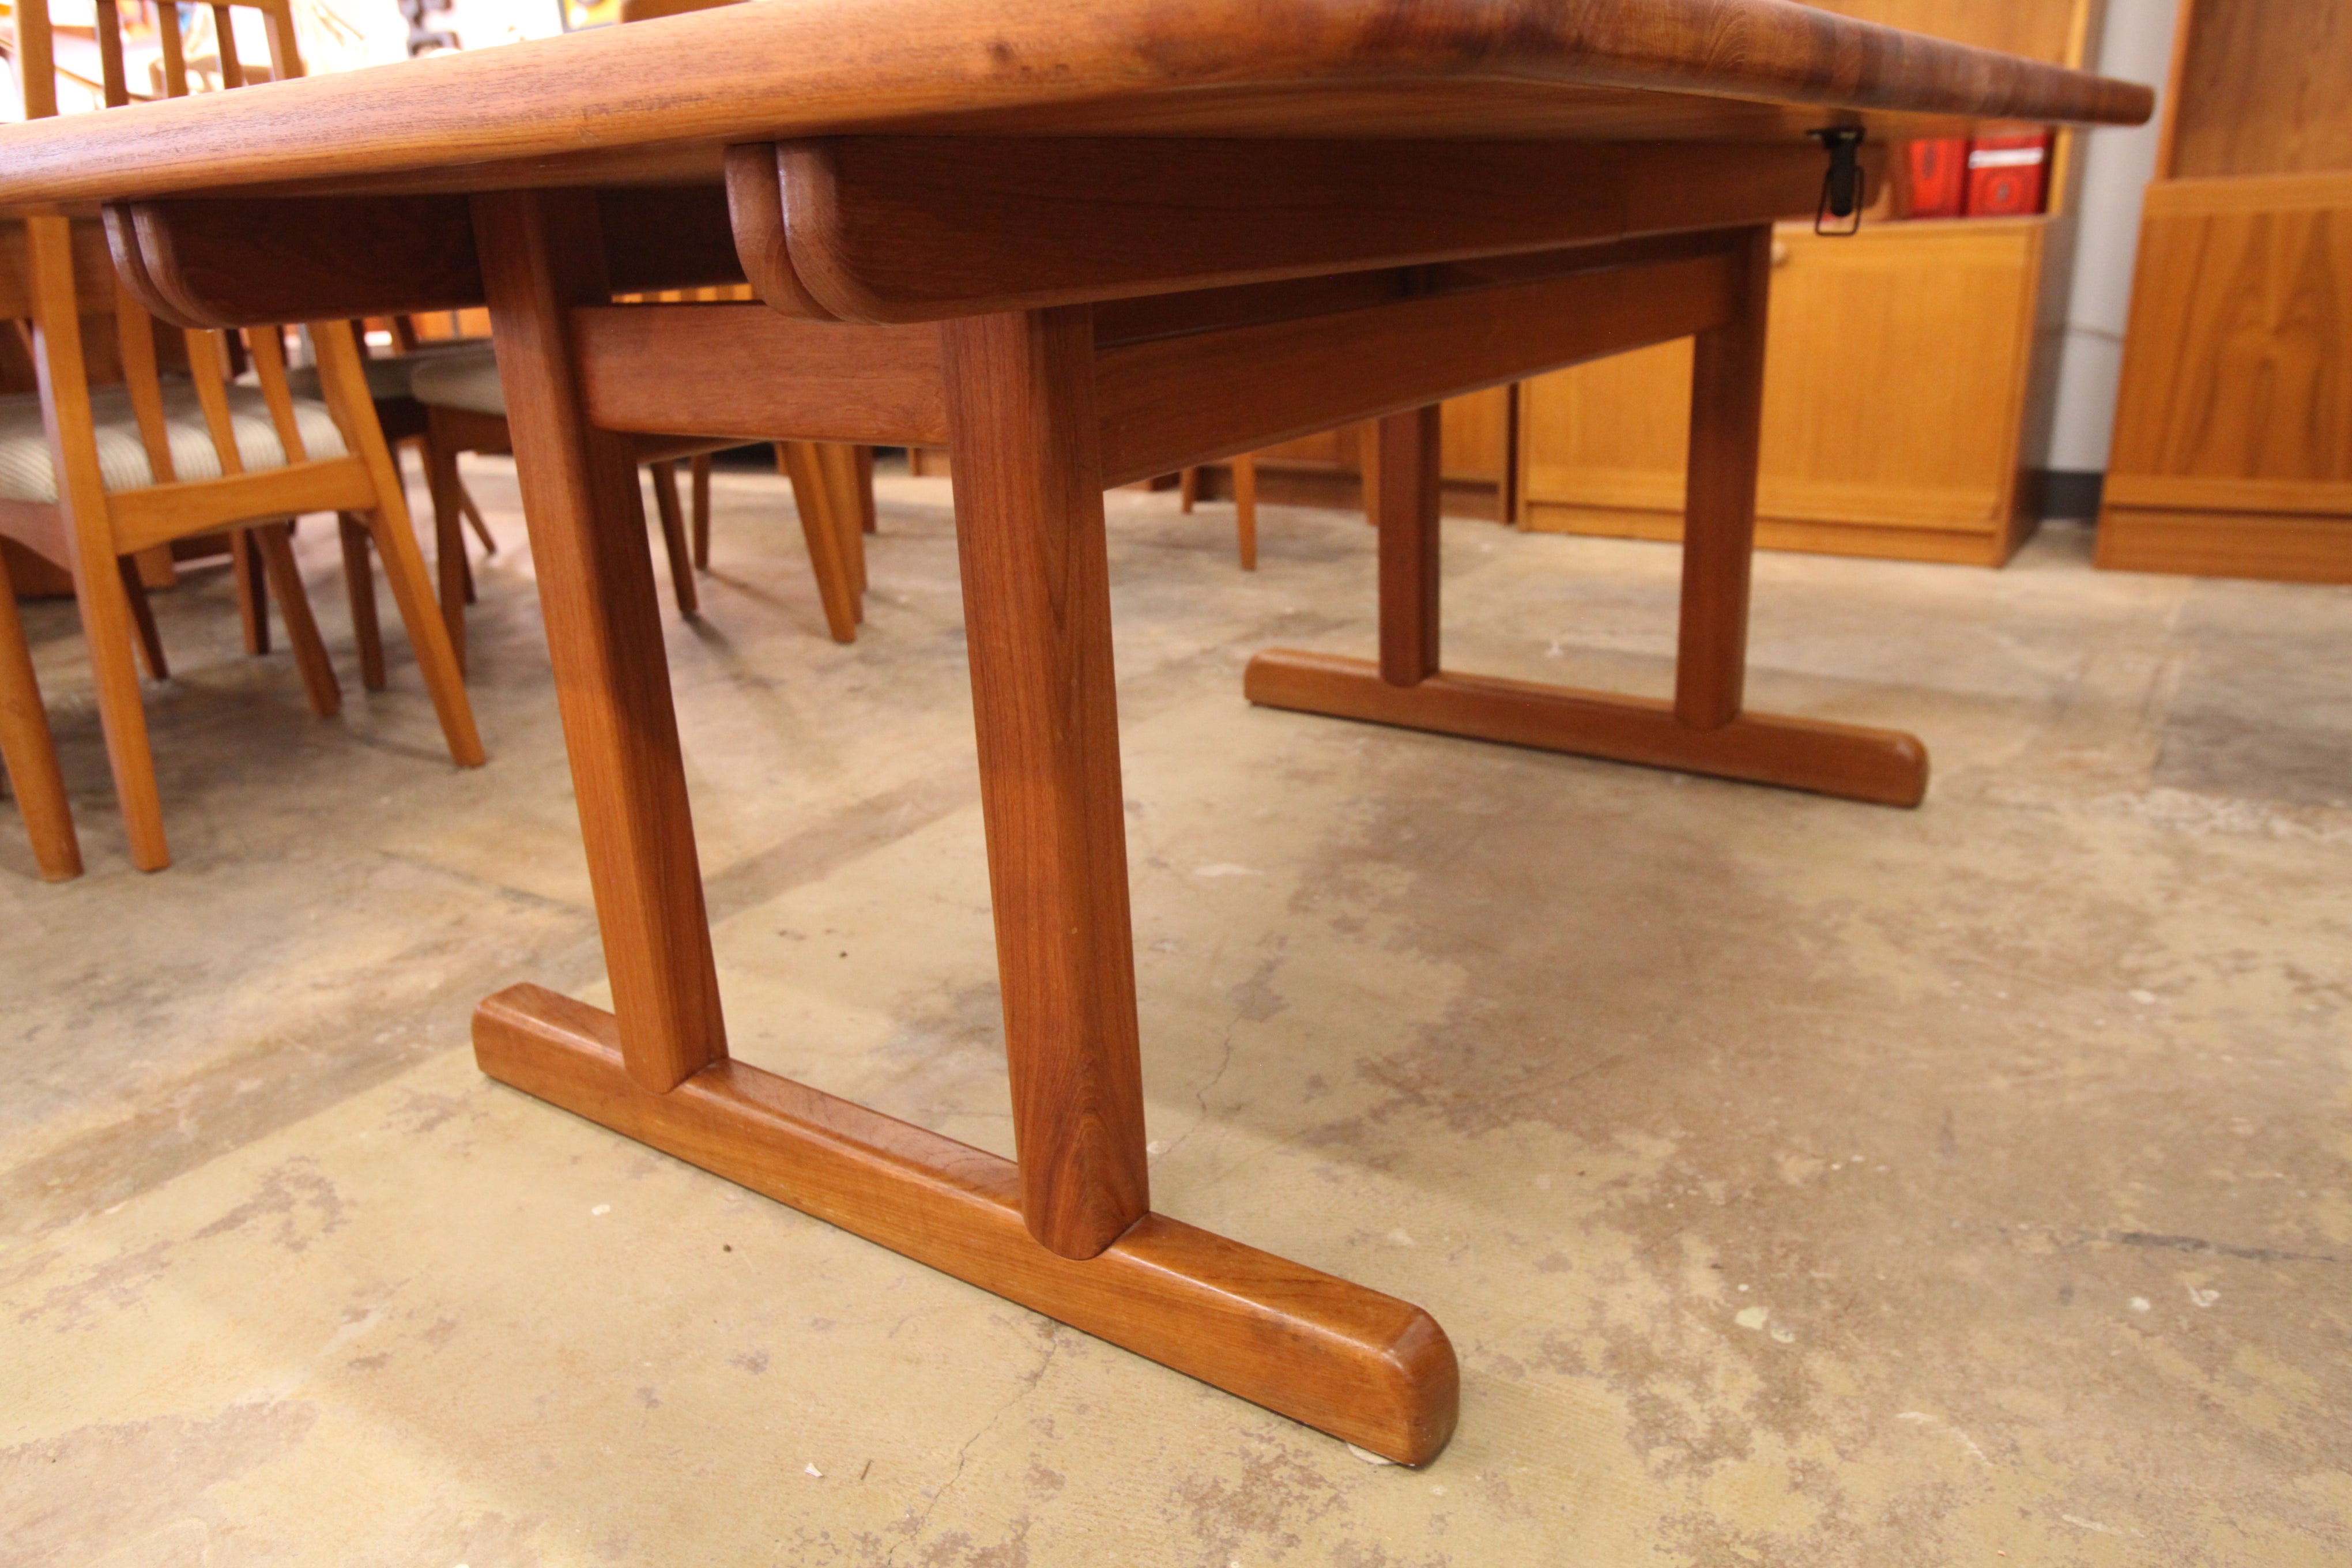 Beautiful and Rare Vintage "Solid Teak" Dining Table w/ 2 Leafs (102" x 43") (66.5" x 43")